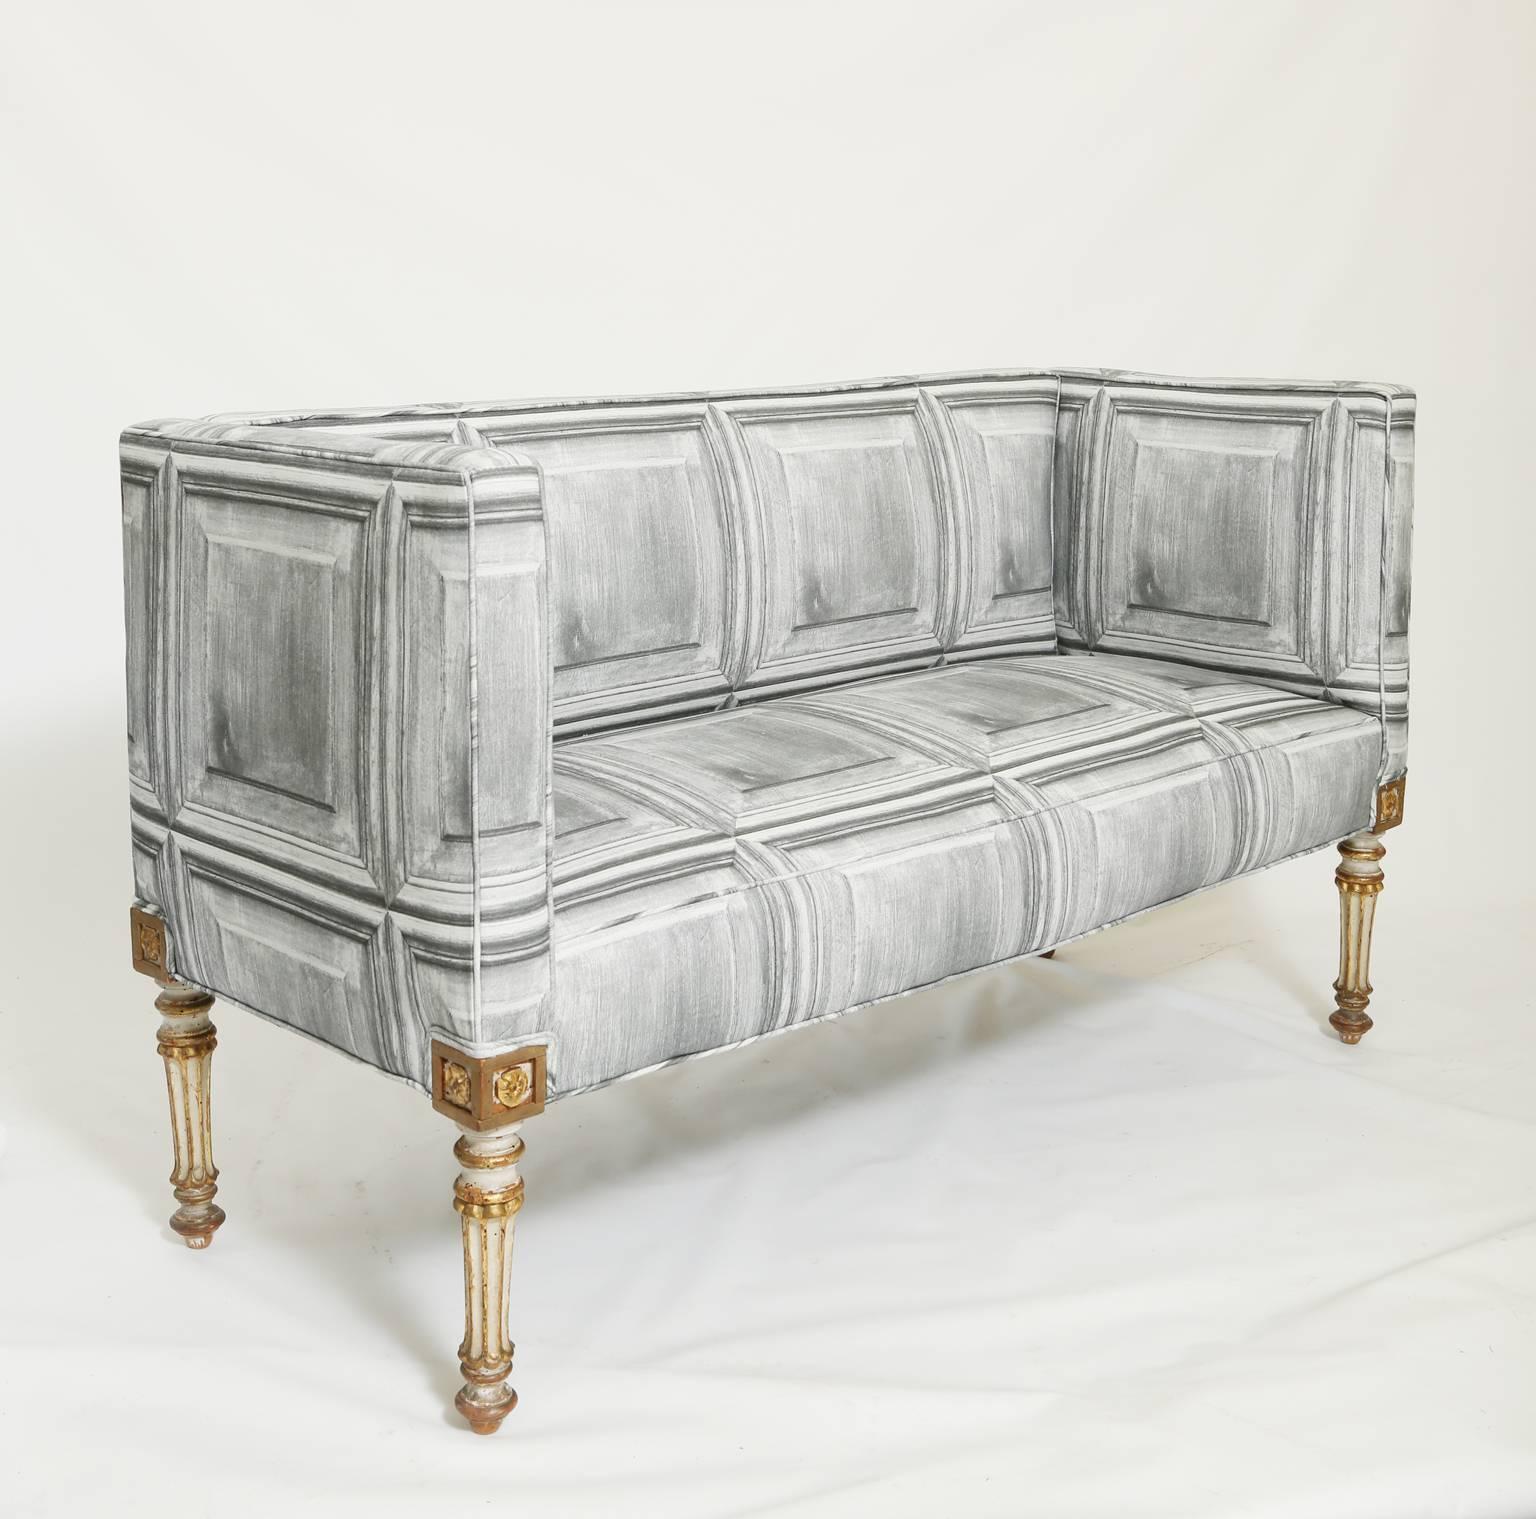 Sofa or settee, having straight padded back and sides, its crown seat raised on rosette-headed, painted and parcel gilt, stop fluted round tapering legs.

Stock ID: D9173